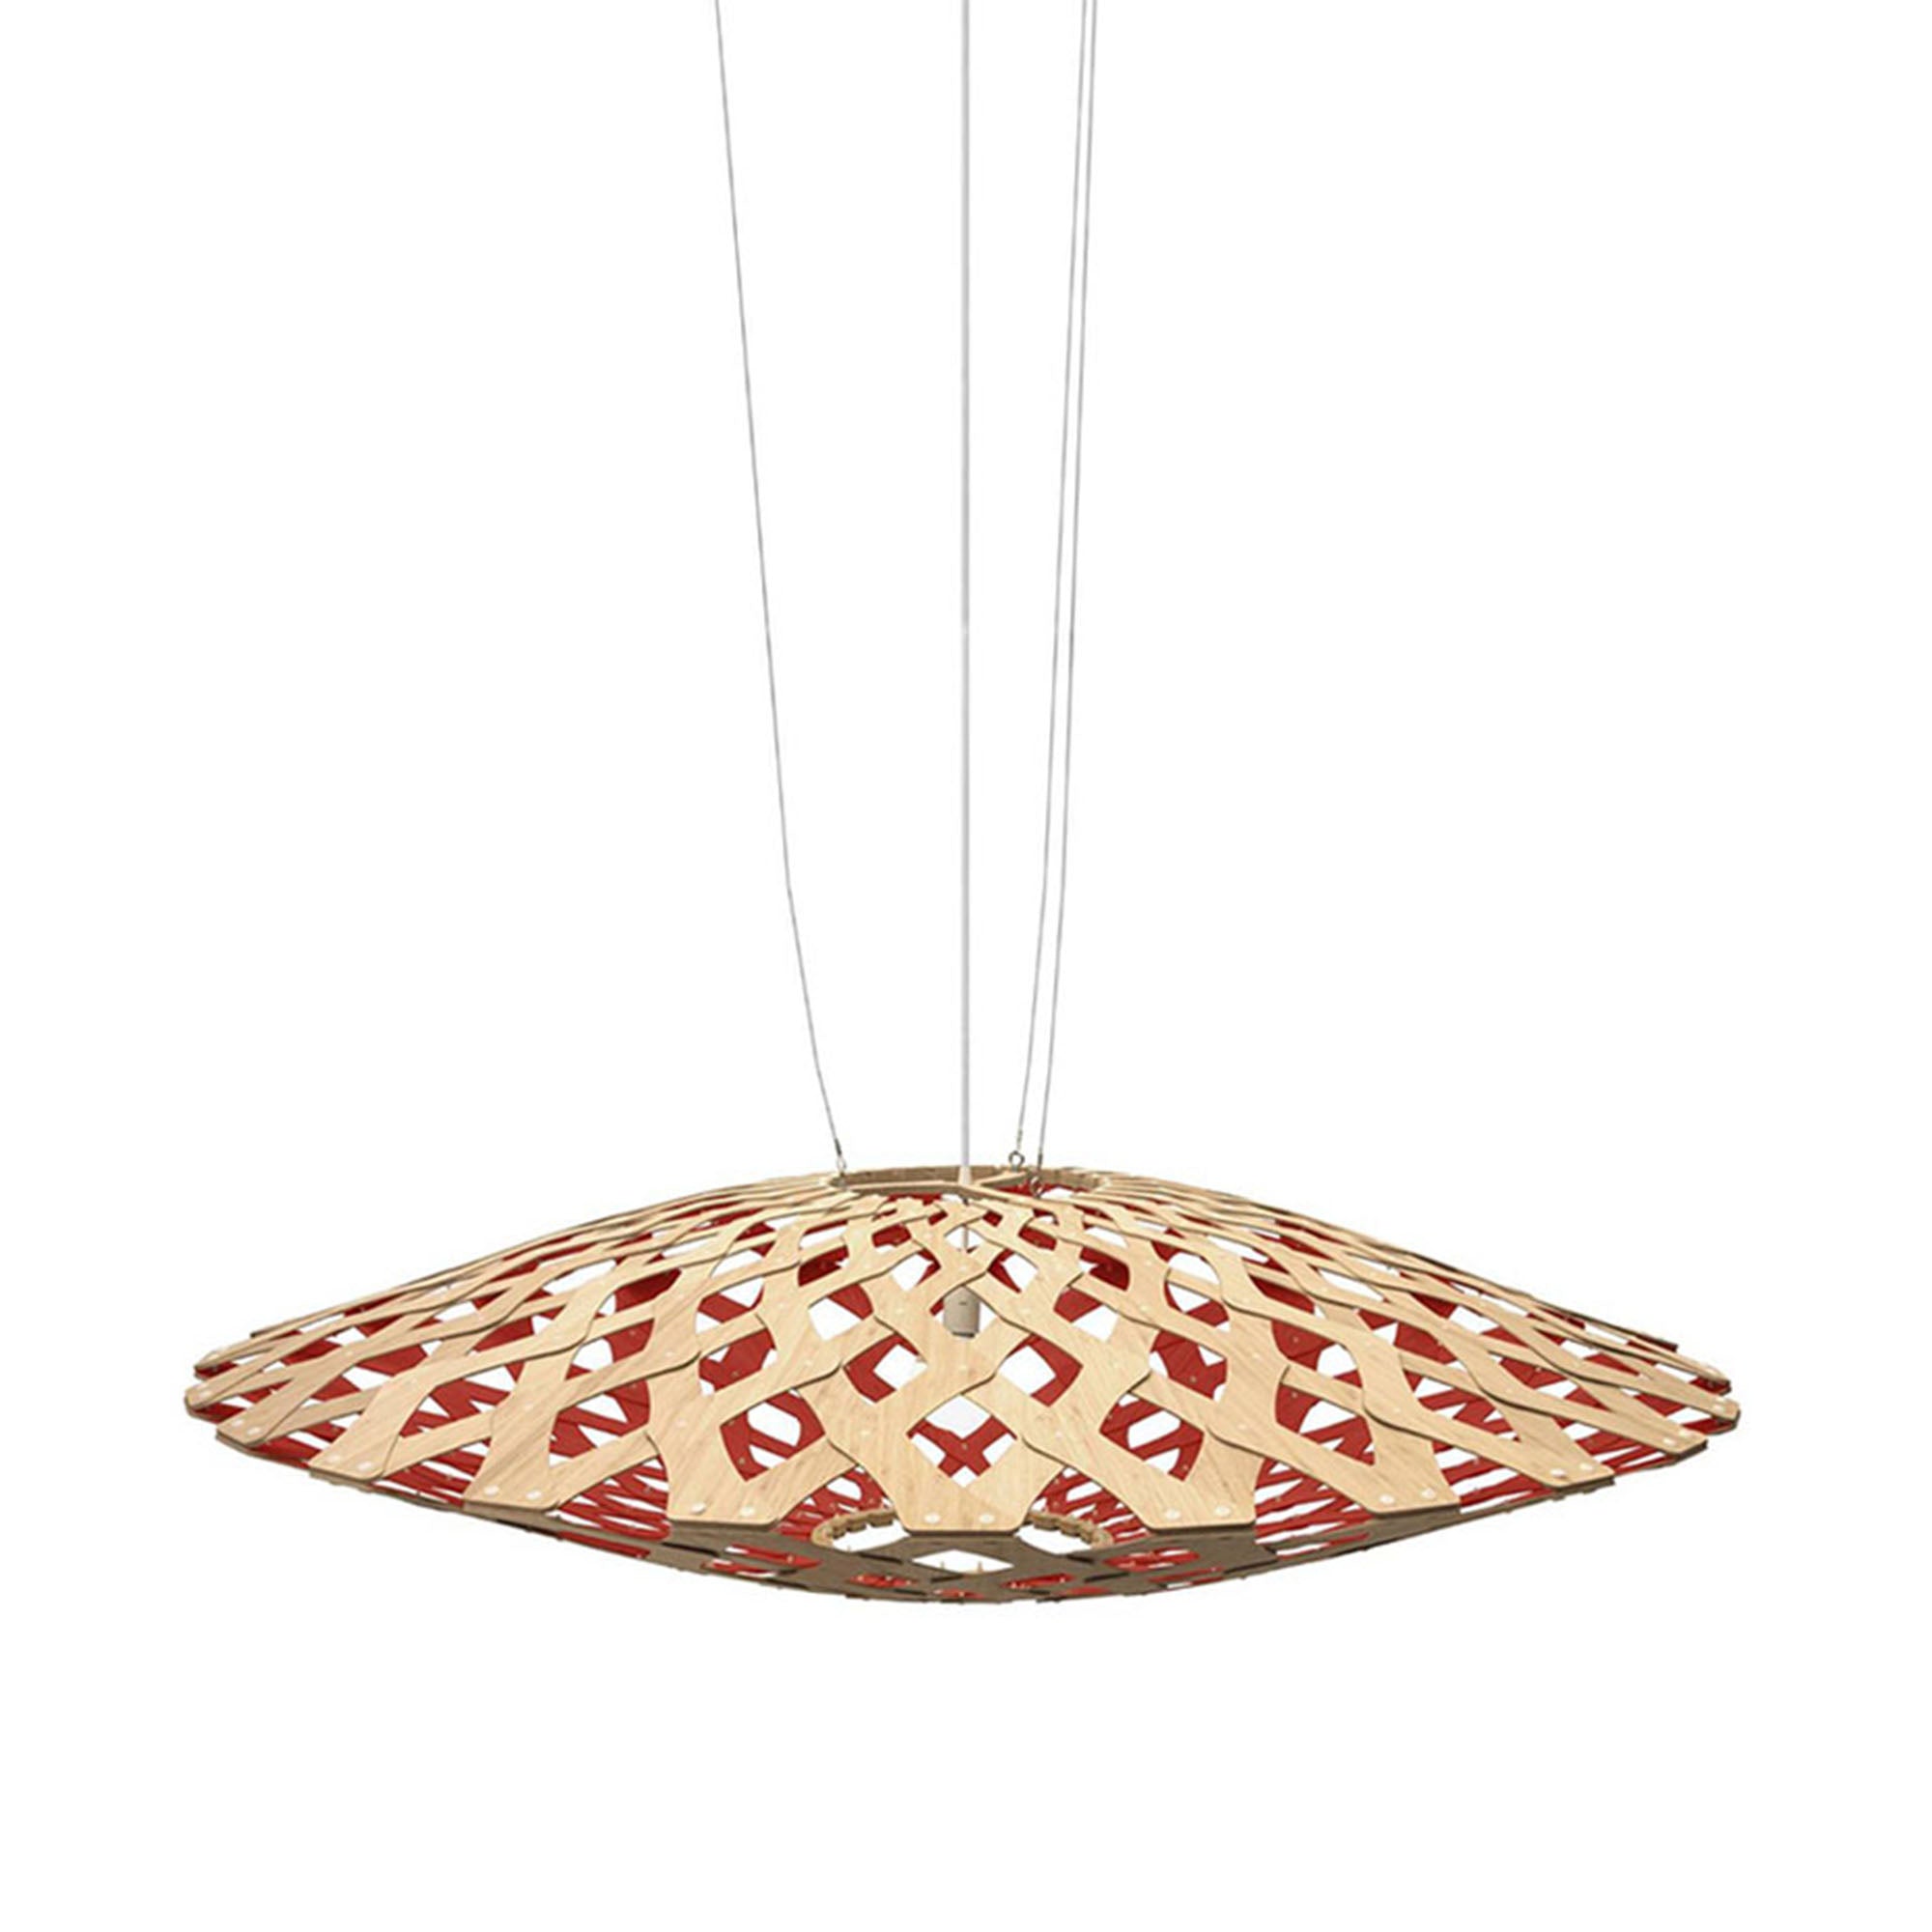 Flax Pendant Light: Large + Bamboo + Red + White